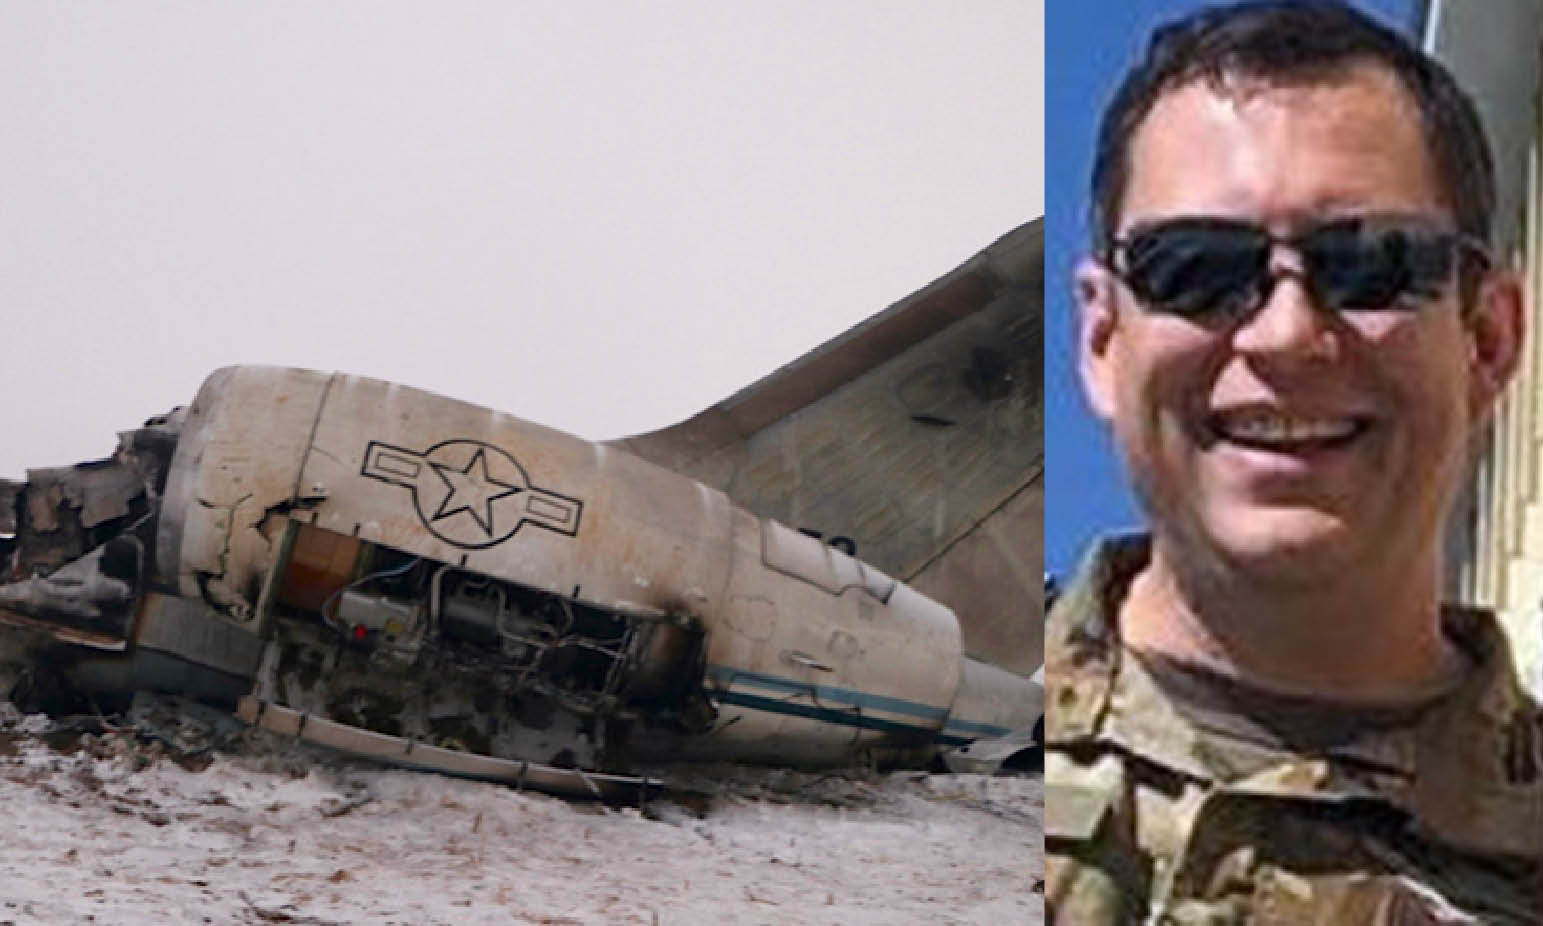 Afghanistan: Pentagon Confirmed Dead Airmen’s Identity. Pilot worked for Intelligence CIA